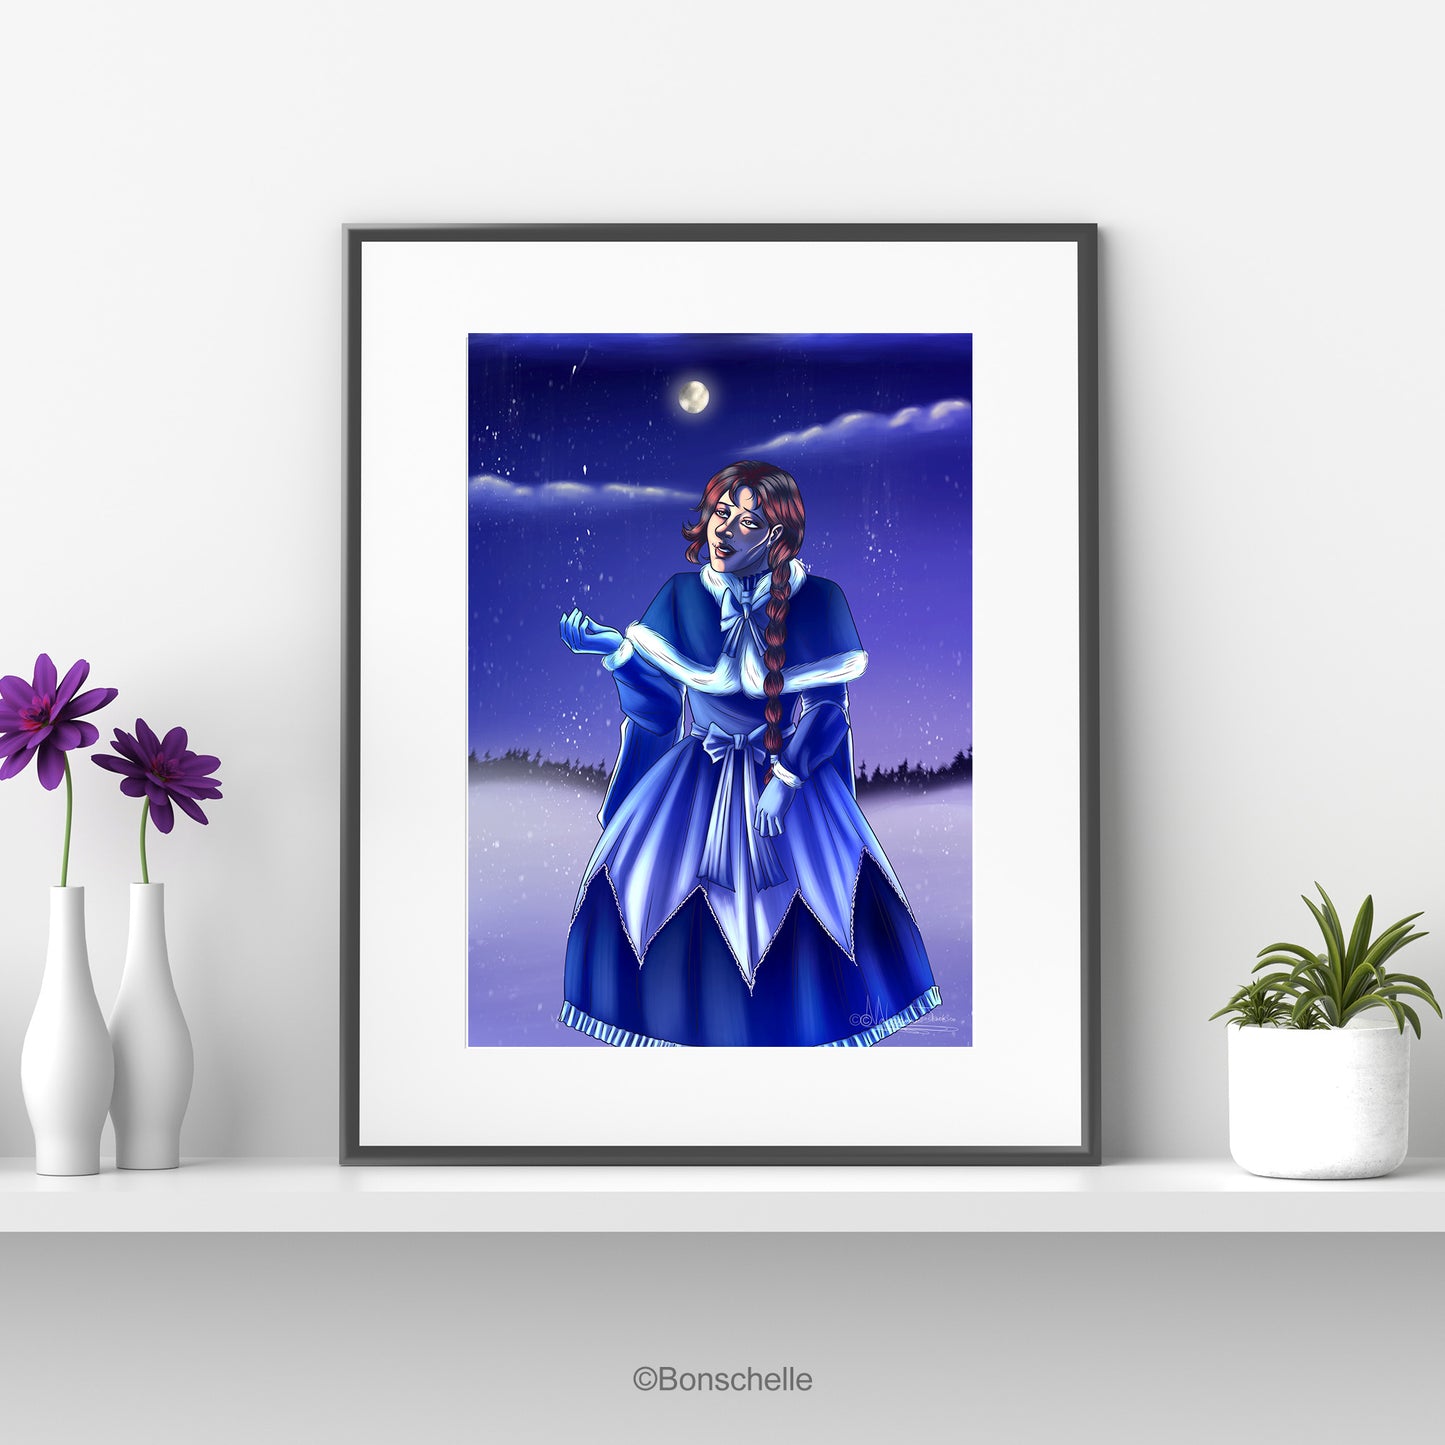 An original art print of a young girl in Lolita fashion holding her hand out to the snowflakes as they fall. The full moon glows in the background. The print is mounted on white with a black frame and sits on a white shelf. On one side are flowers in vases, on the other a cactus in a flowerpot.